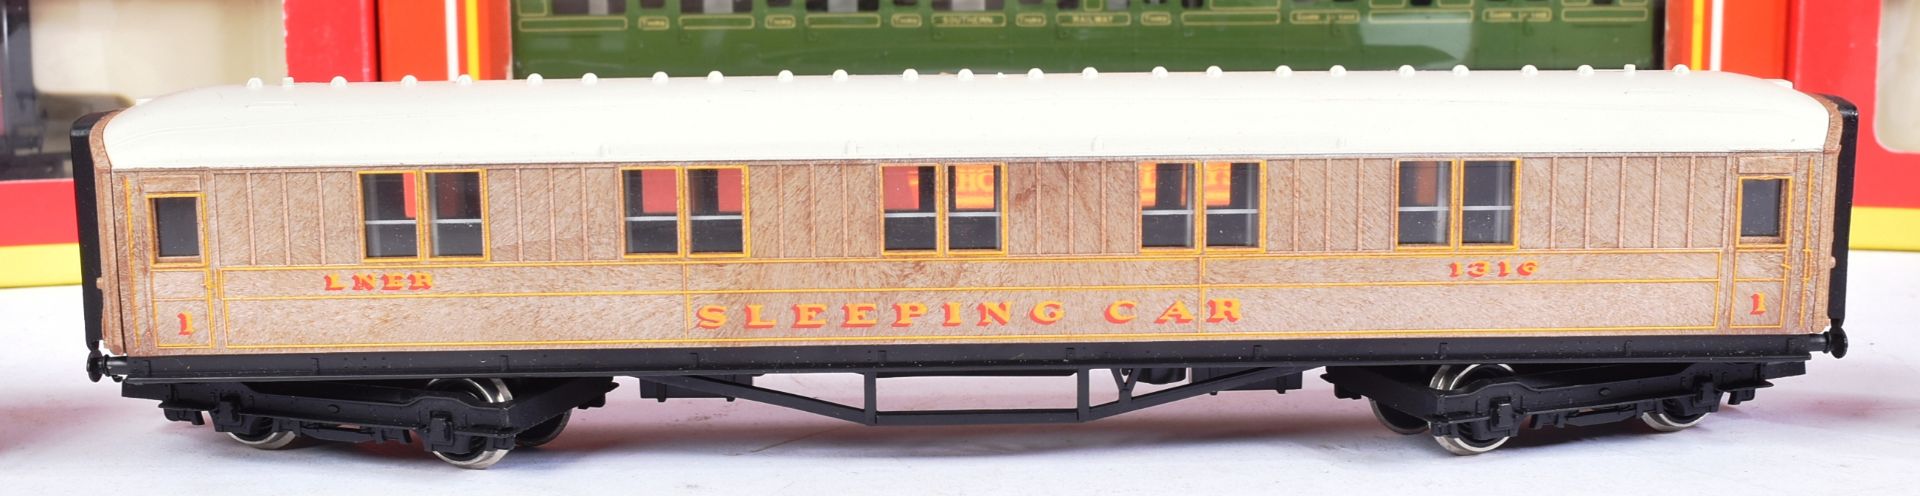 MODEL RAILWAY - COLLECTION OF HORNBY OO GAUGE CARRIAGES - Image 2 of 6